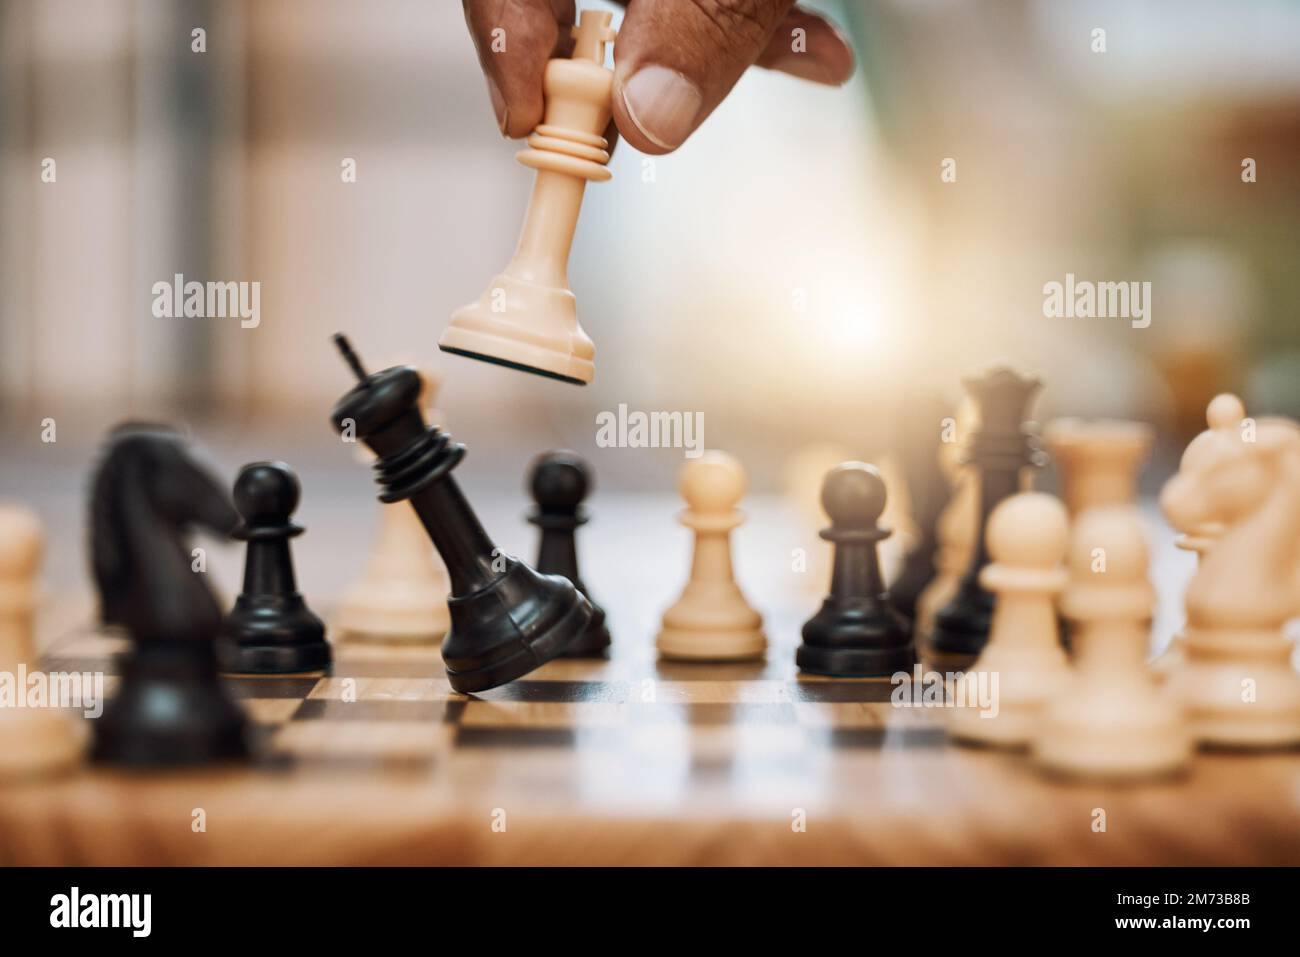 Hand Of A Man Taking A Chess Piece To Make The Next Move In A Chess Game.  Close Up. Spring Day Outside. Stock Photo, Picture and Royalty Free Image.  Image 198493516.